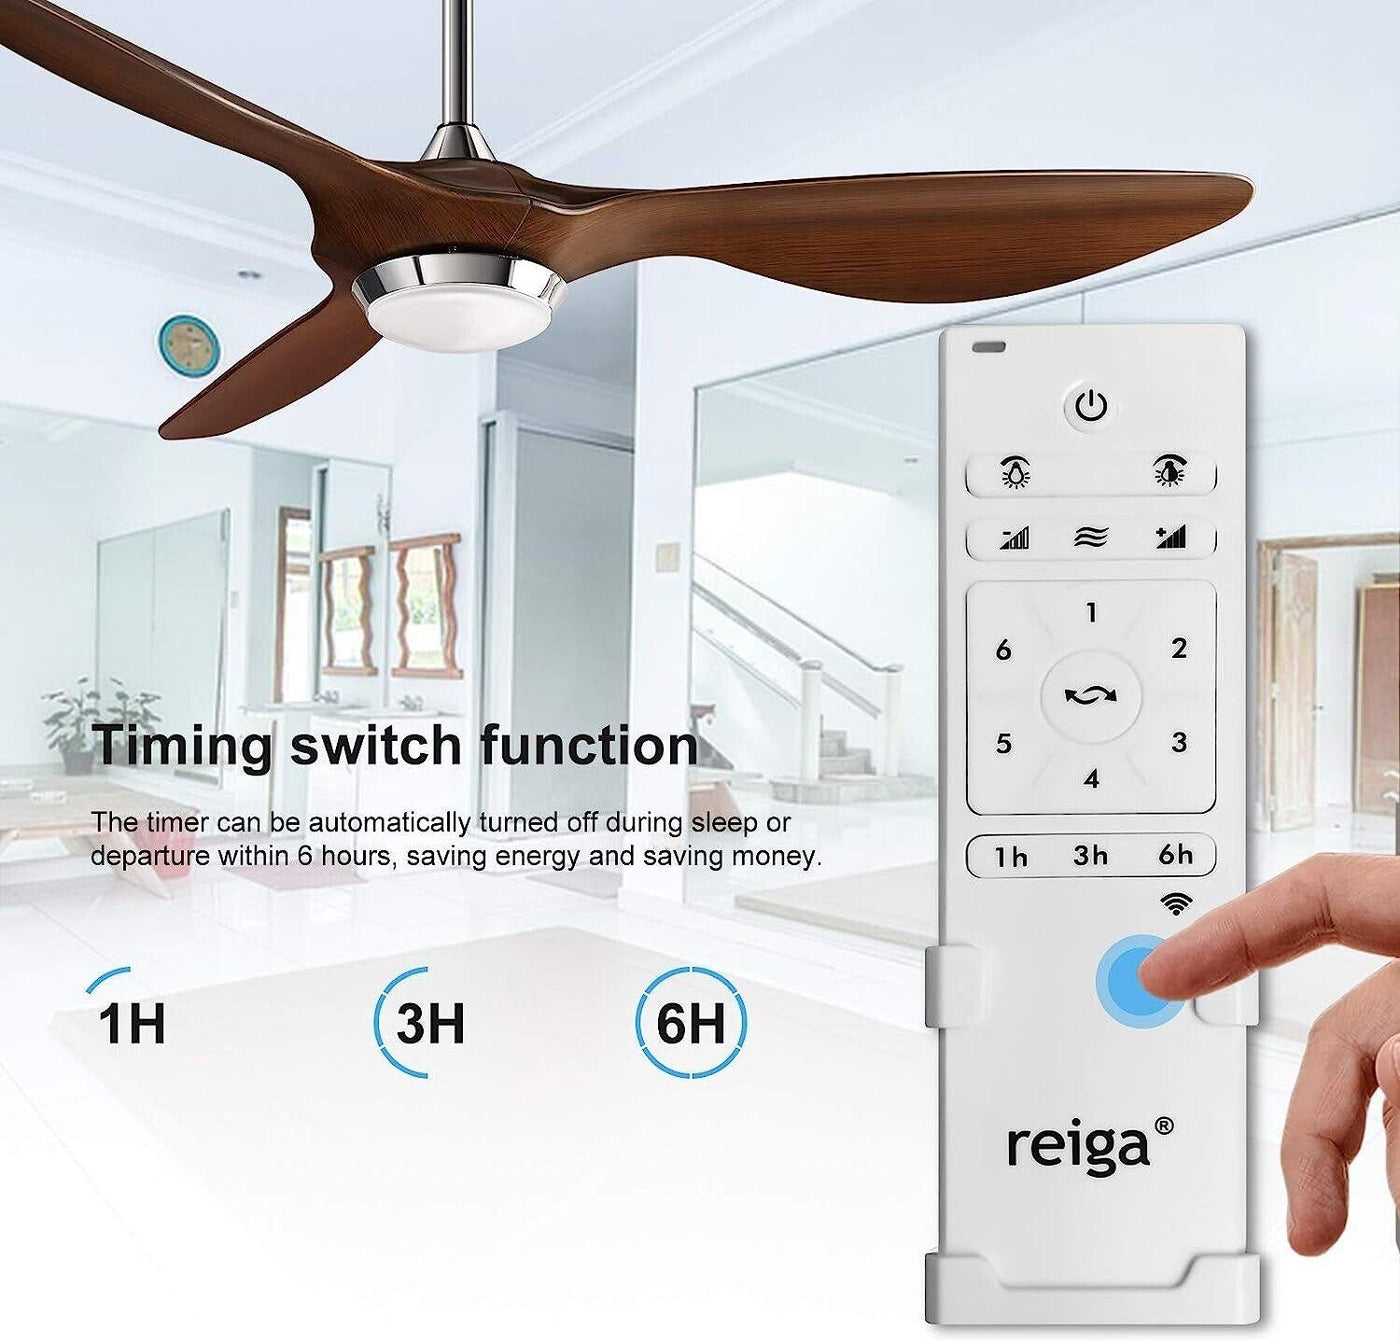 Reiga 132 cm Hand-painted Smart Ceiling Fan with Dimmable LED Light - Massive Discounts